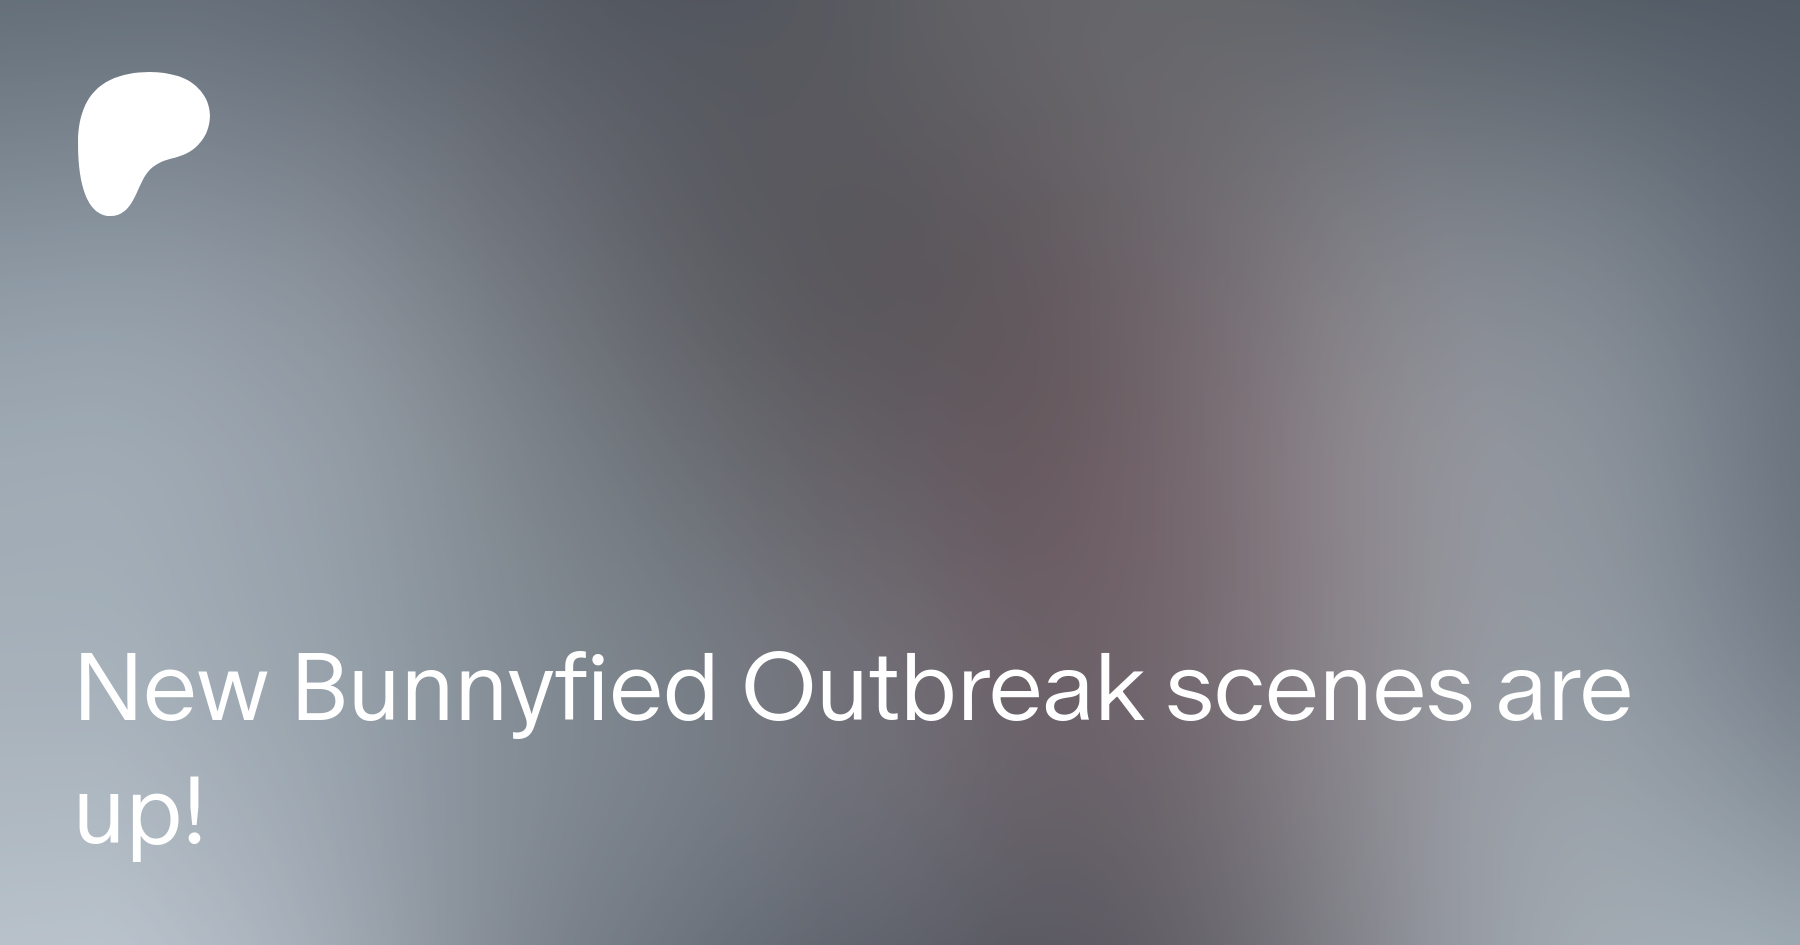 Bunnyfied outbreak